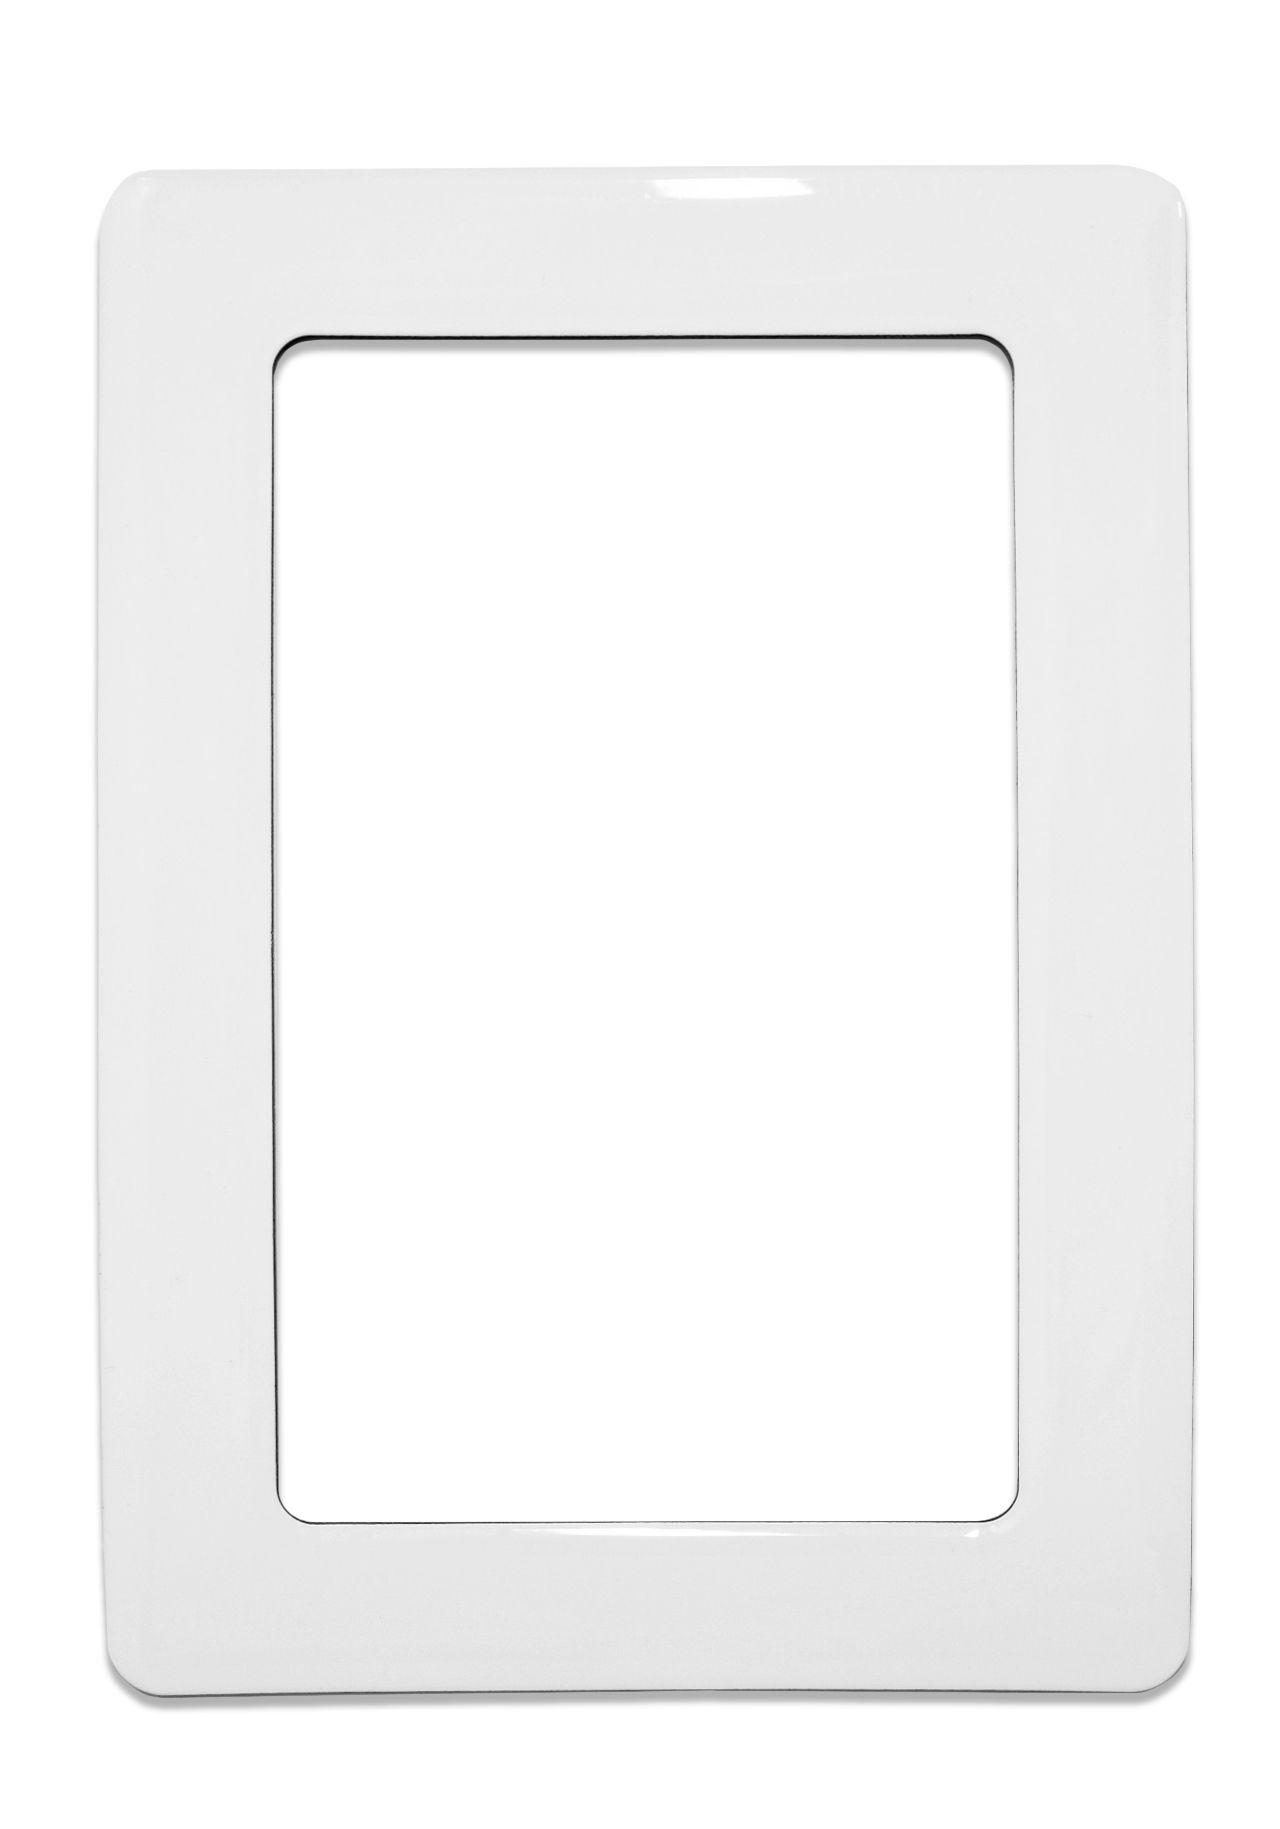 Magnetic self-adhesive frame size 12.3x8.1cm - white